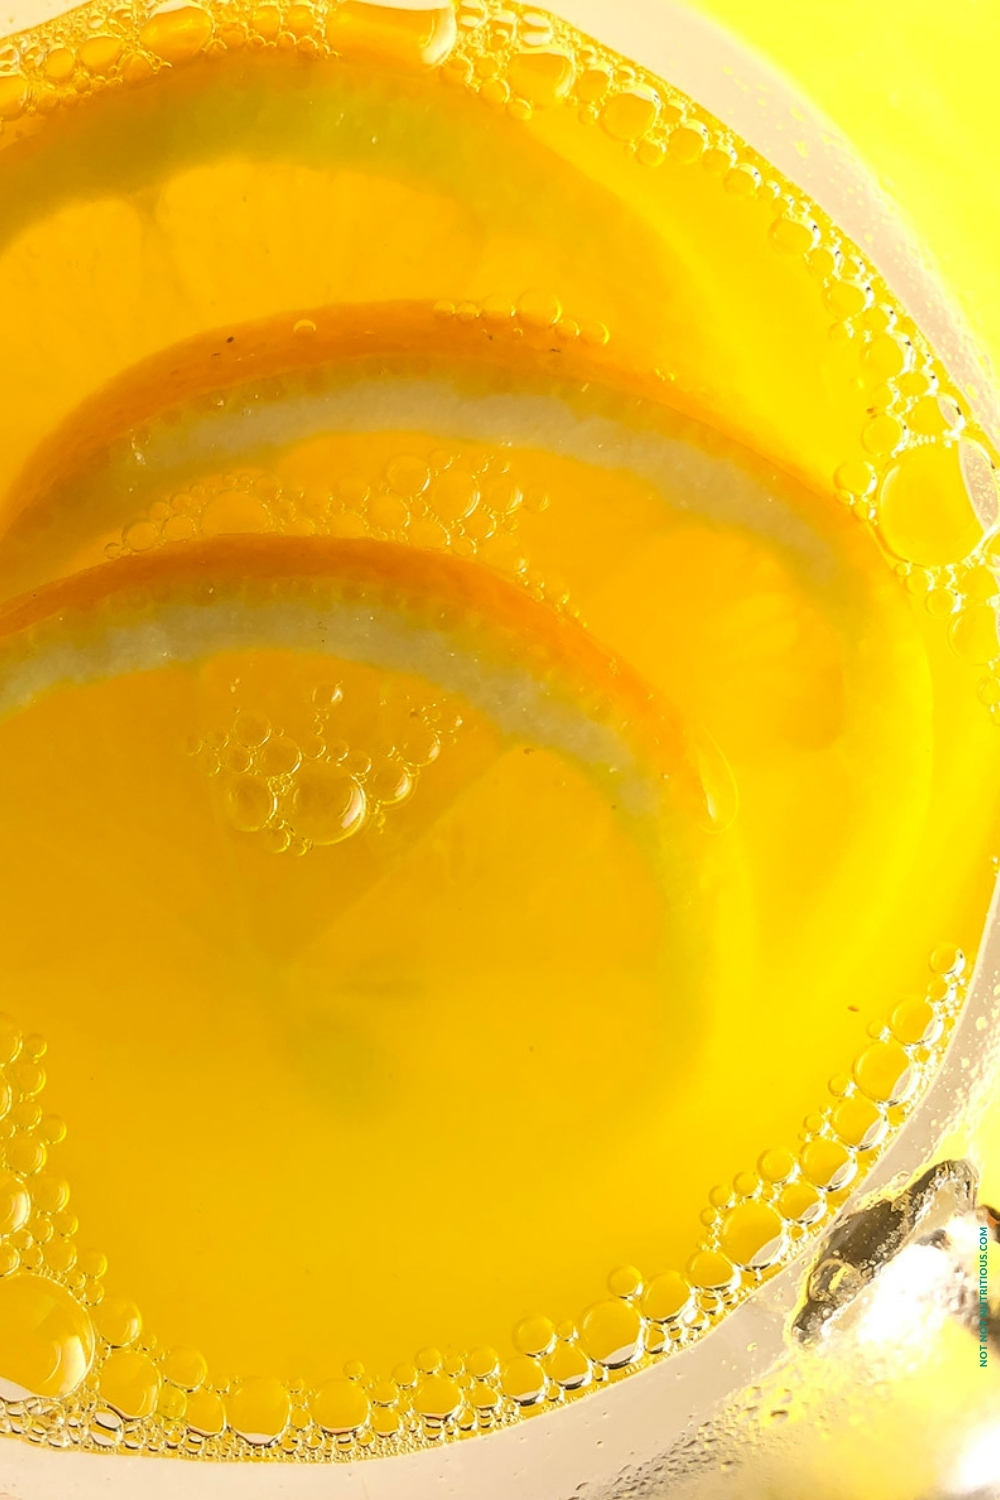 Top-down close up photo of hot lemonade bubbling in a clear glass. There are 3 lemon slices in the glass. The glass is set against a bright yellow background.